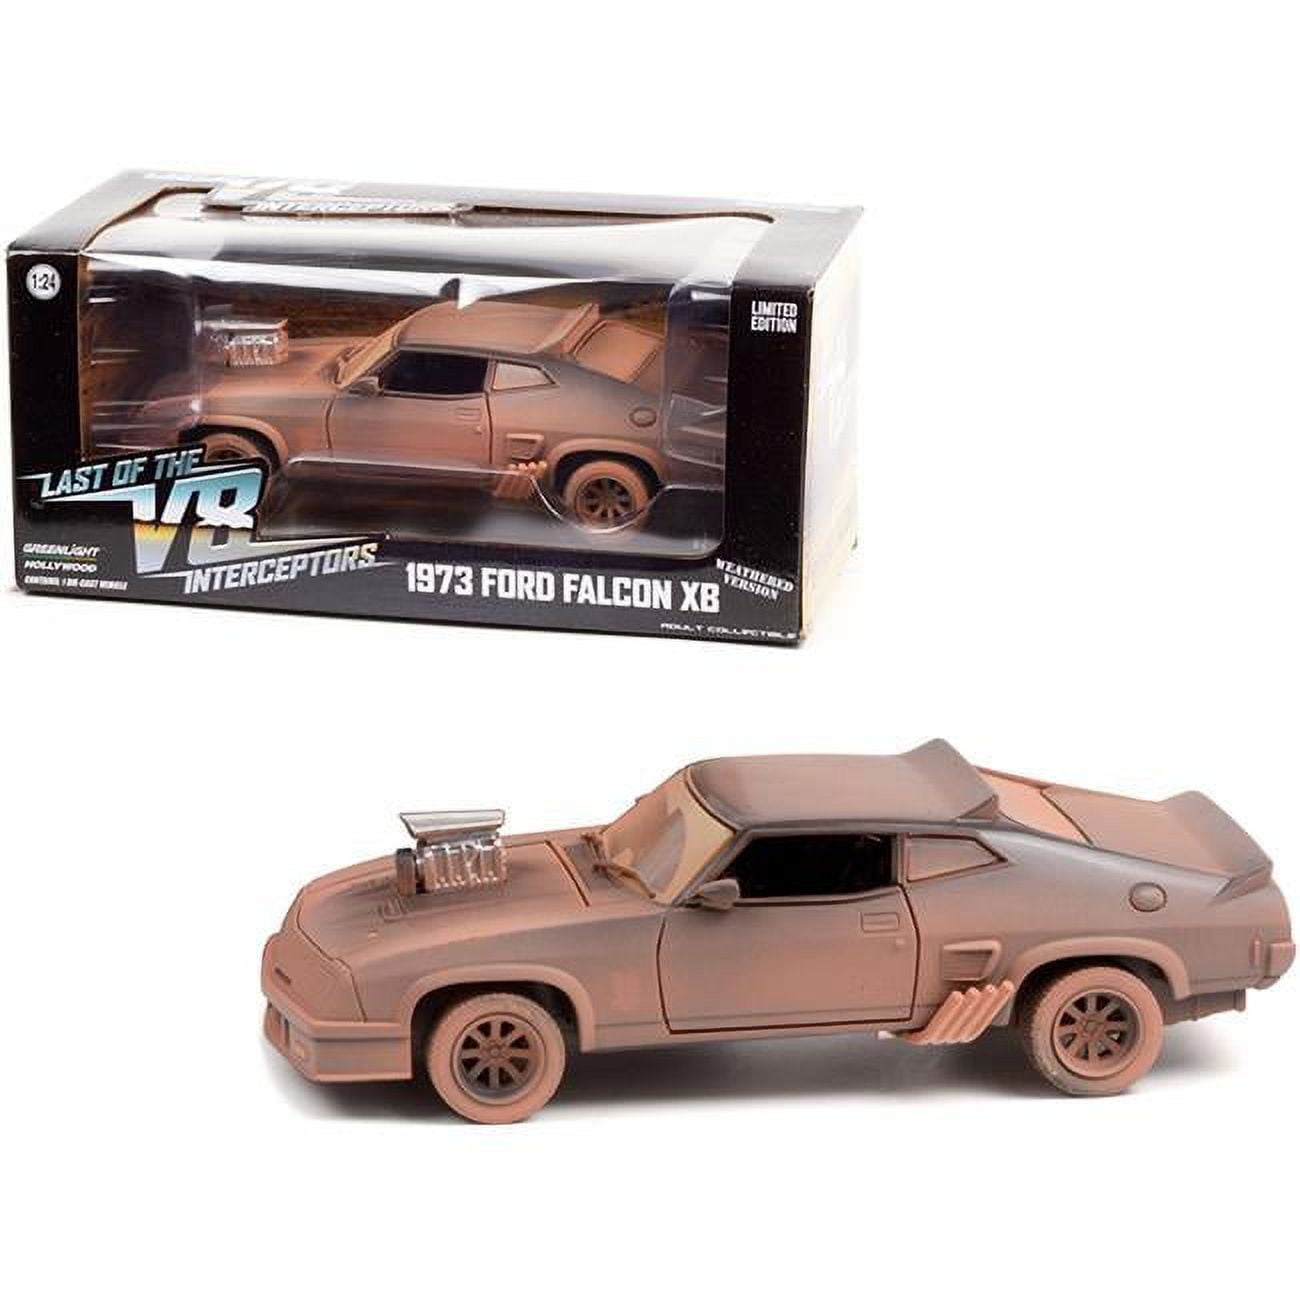 Picture of Greenlight 84052 1-24 Diecast Model Car for 1973 Ford Falcon XB Weathered Version Last Of the V8 Interceptors 1979 Movie